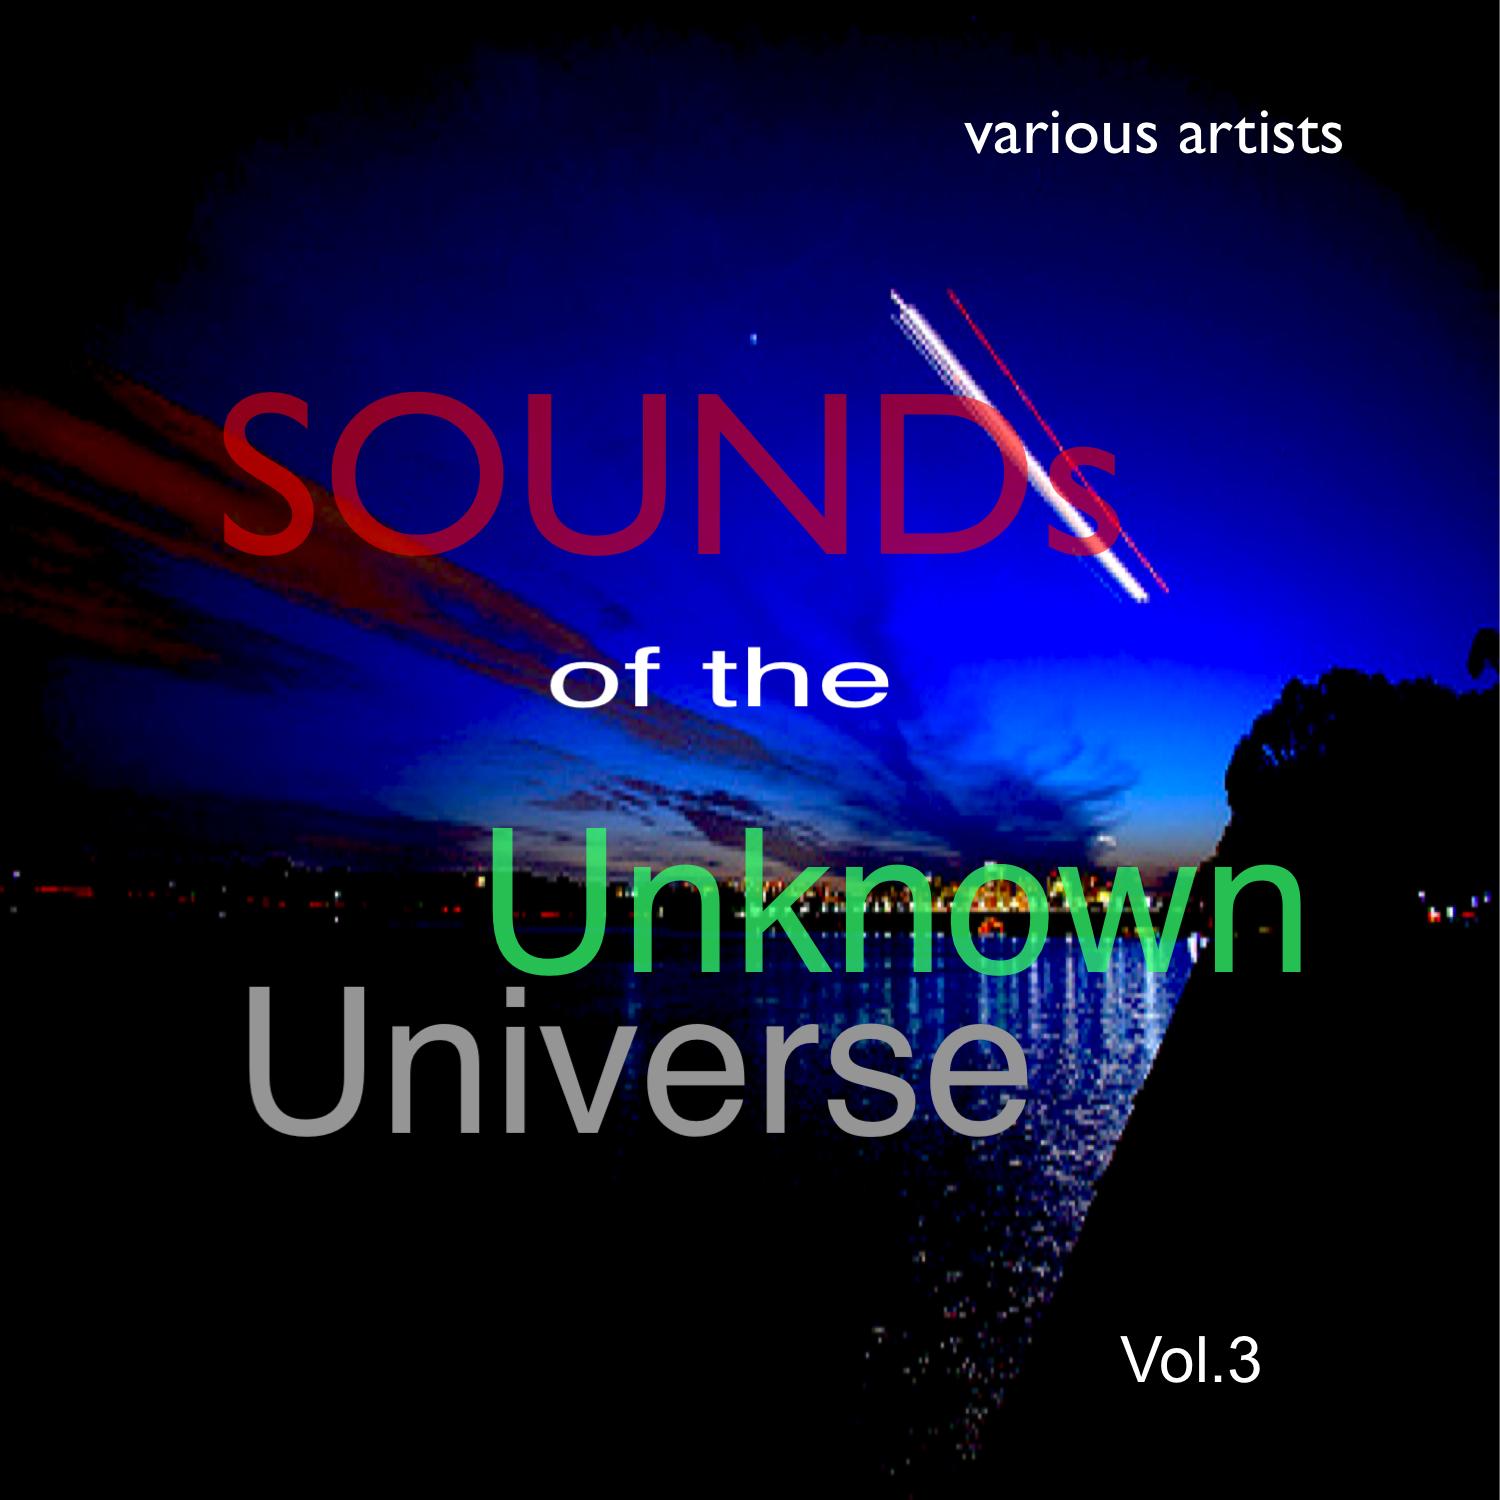 Sounds of the Unknown Universe: Vol.3